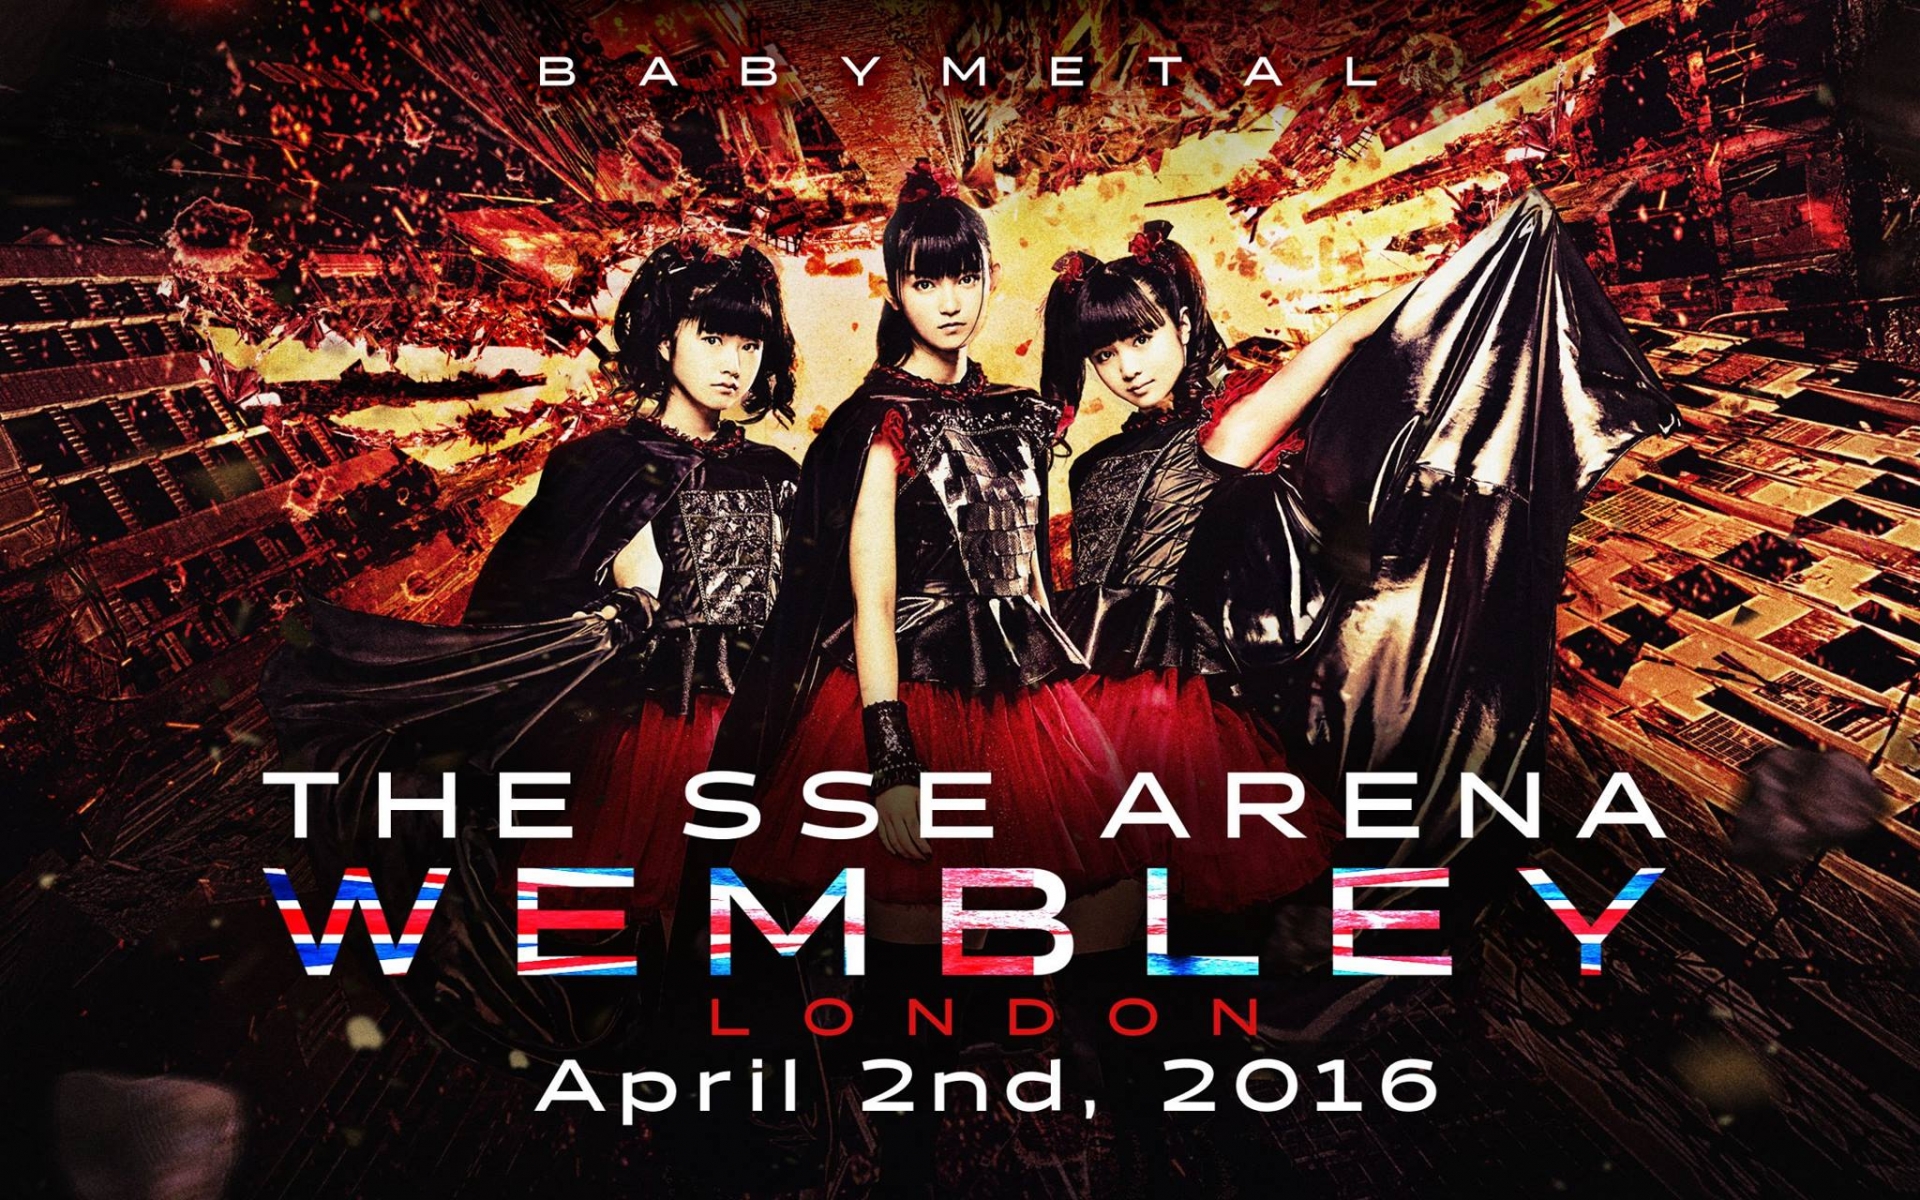 Announcement From the FOX GOD! BABYMETAL to Headline The SSE Arena, Wembley in 2016!